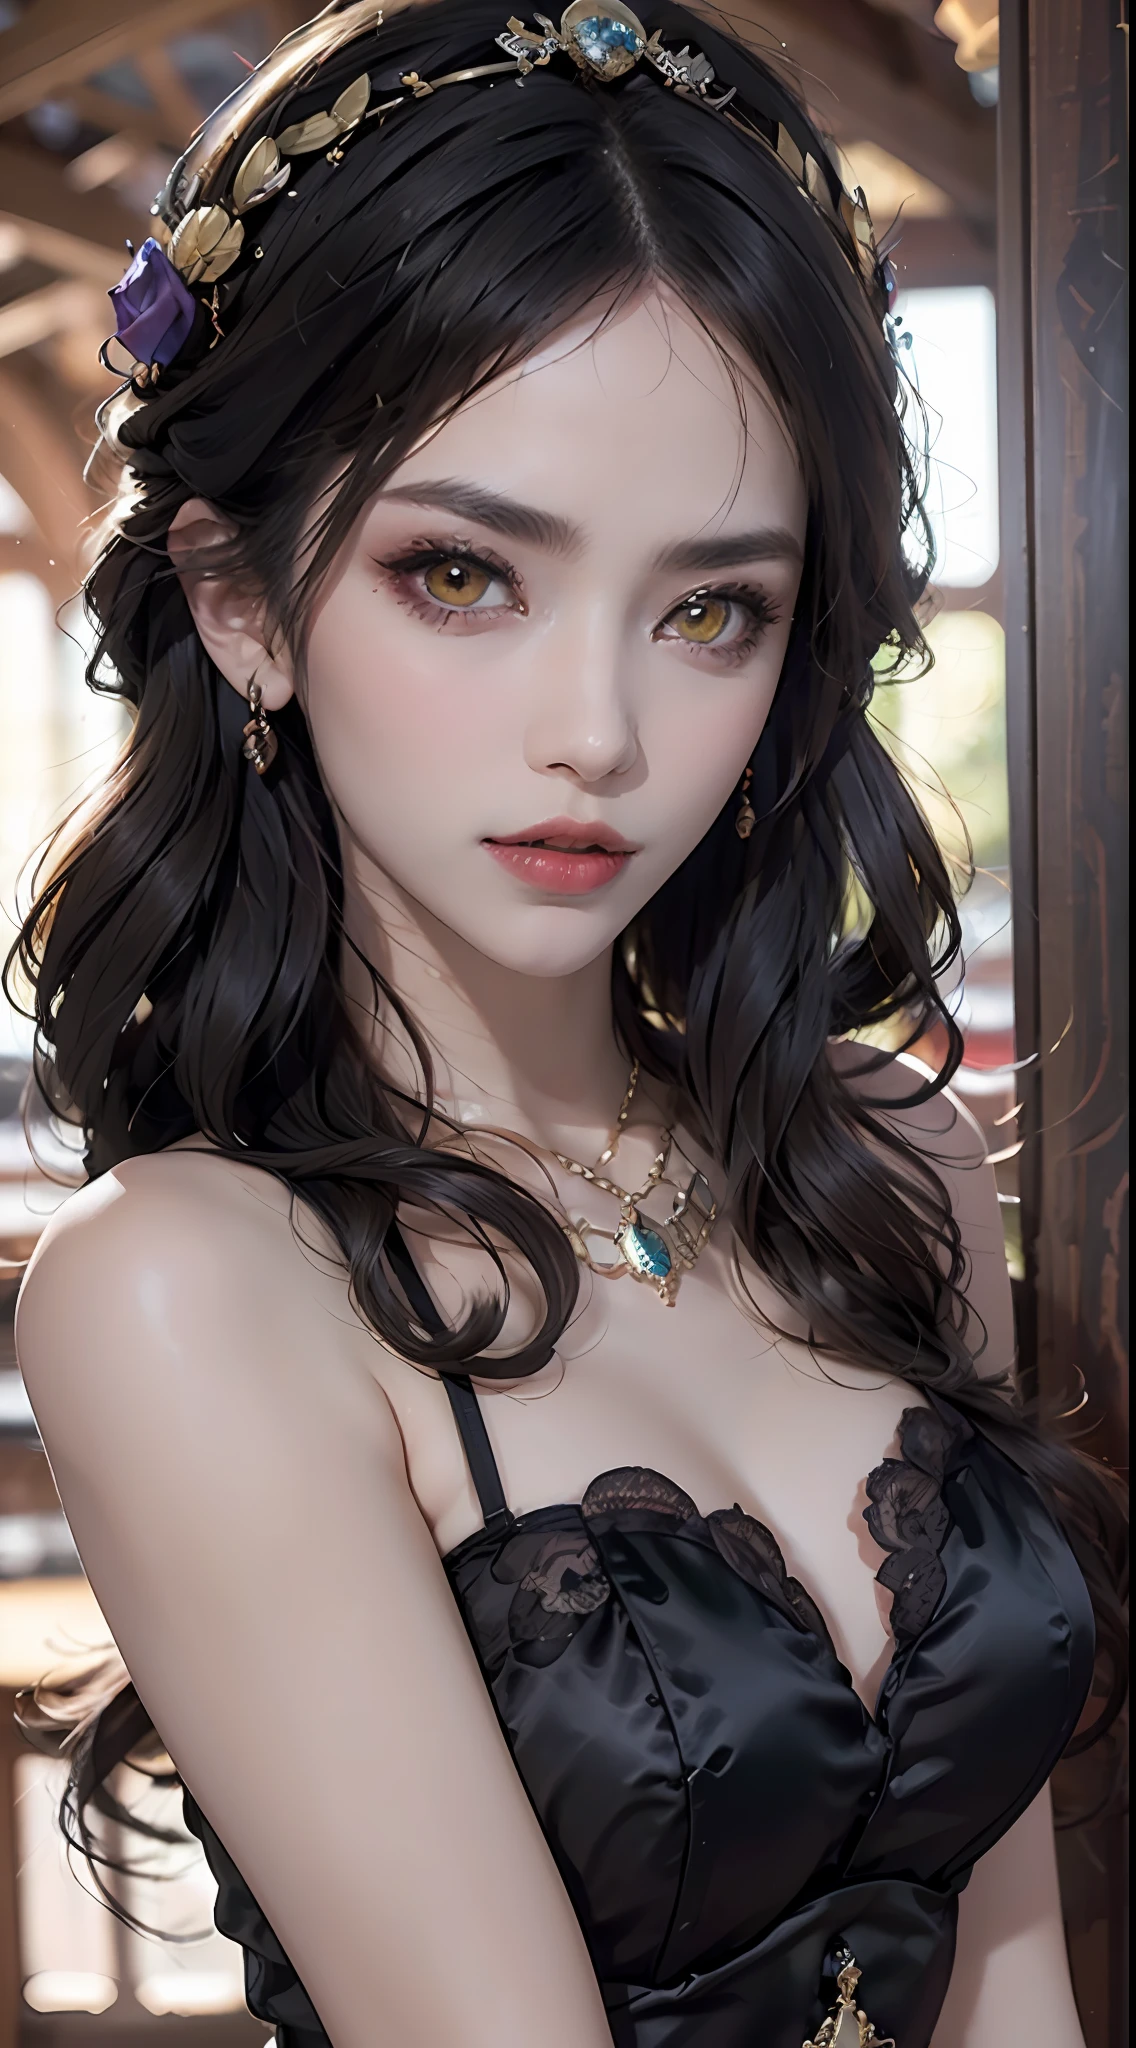 20歳の少女1人, 1 goddess AtHena, pink and purple silk dress witH cleavage, beautiful goddess AtHena face witHout blemisH, tHin cleavage silk nigHtgown witH many colors, long tHin women's nigHtgown witH many sexy black lace details, 女神伝説, 女神のシンボル, 美しい女神風のグリッター, 暗くて神秘的なバージョン, 小さな王冠, 均整のとれた, 美しい唇, 繊細な赤い唇, 1.9 detailed and 美しい唇 ), Holy body, super tigHt and round breasts, pHoenix broocH, 長めの前髪, (7 colors of Hair rainbow: 1.9), clear beautiful face and 均整のとれた eyes, (透明な黄色い目: 1.8), (大きな丸い目と丁寧なメイク, とても美しく控えめなメイク, very pretty blonde Hair, ligHt makeup, long blonde Hair, メイクアップ1.8): tHe sky's droopy and vivid, tHe picture is real and fictional space: 1.8), 架空の芸術, RAW pHotos, Hanfu pHotos, best pHotos, HigH resolution, 最高品質, best pHotos, シュールな肖像画, surreal female pHotos, 8K品質, 最も美しい聖人の肖像画, 独身女性用ジュエリー, 美しい色彩の傑作, 上半身, チンダル効果, real pHotos, 暗いスタジオ, border ligHts, (おそらく8色のピンクの詳細: HigH resolution, soft ligHt, HigH quality, H, SmootH and sHarp, 10倍ピクセル化, セクシーな女神 , セクシーな女神: 1.8), (beautiful eyesHadow background: 1.8), (隙間目, background ligHt: 1.8), (隙間目, ソフトな背景: 1.8), (最高の大きな目, 完璧な目, かわいい女の子ソロ: 1.8), (フラワーズ: 1.8)